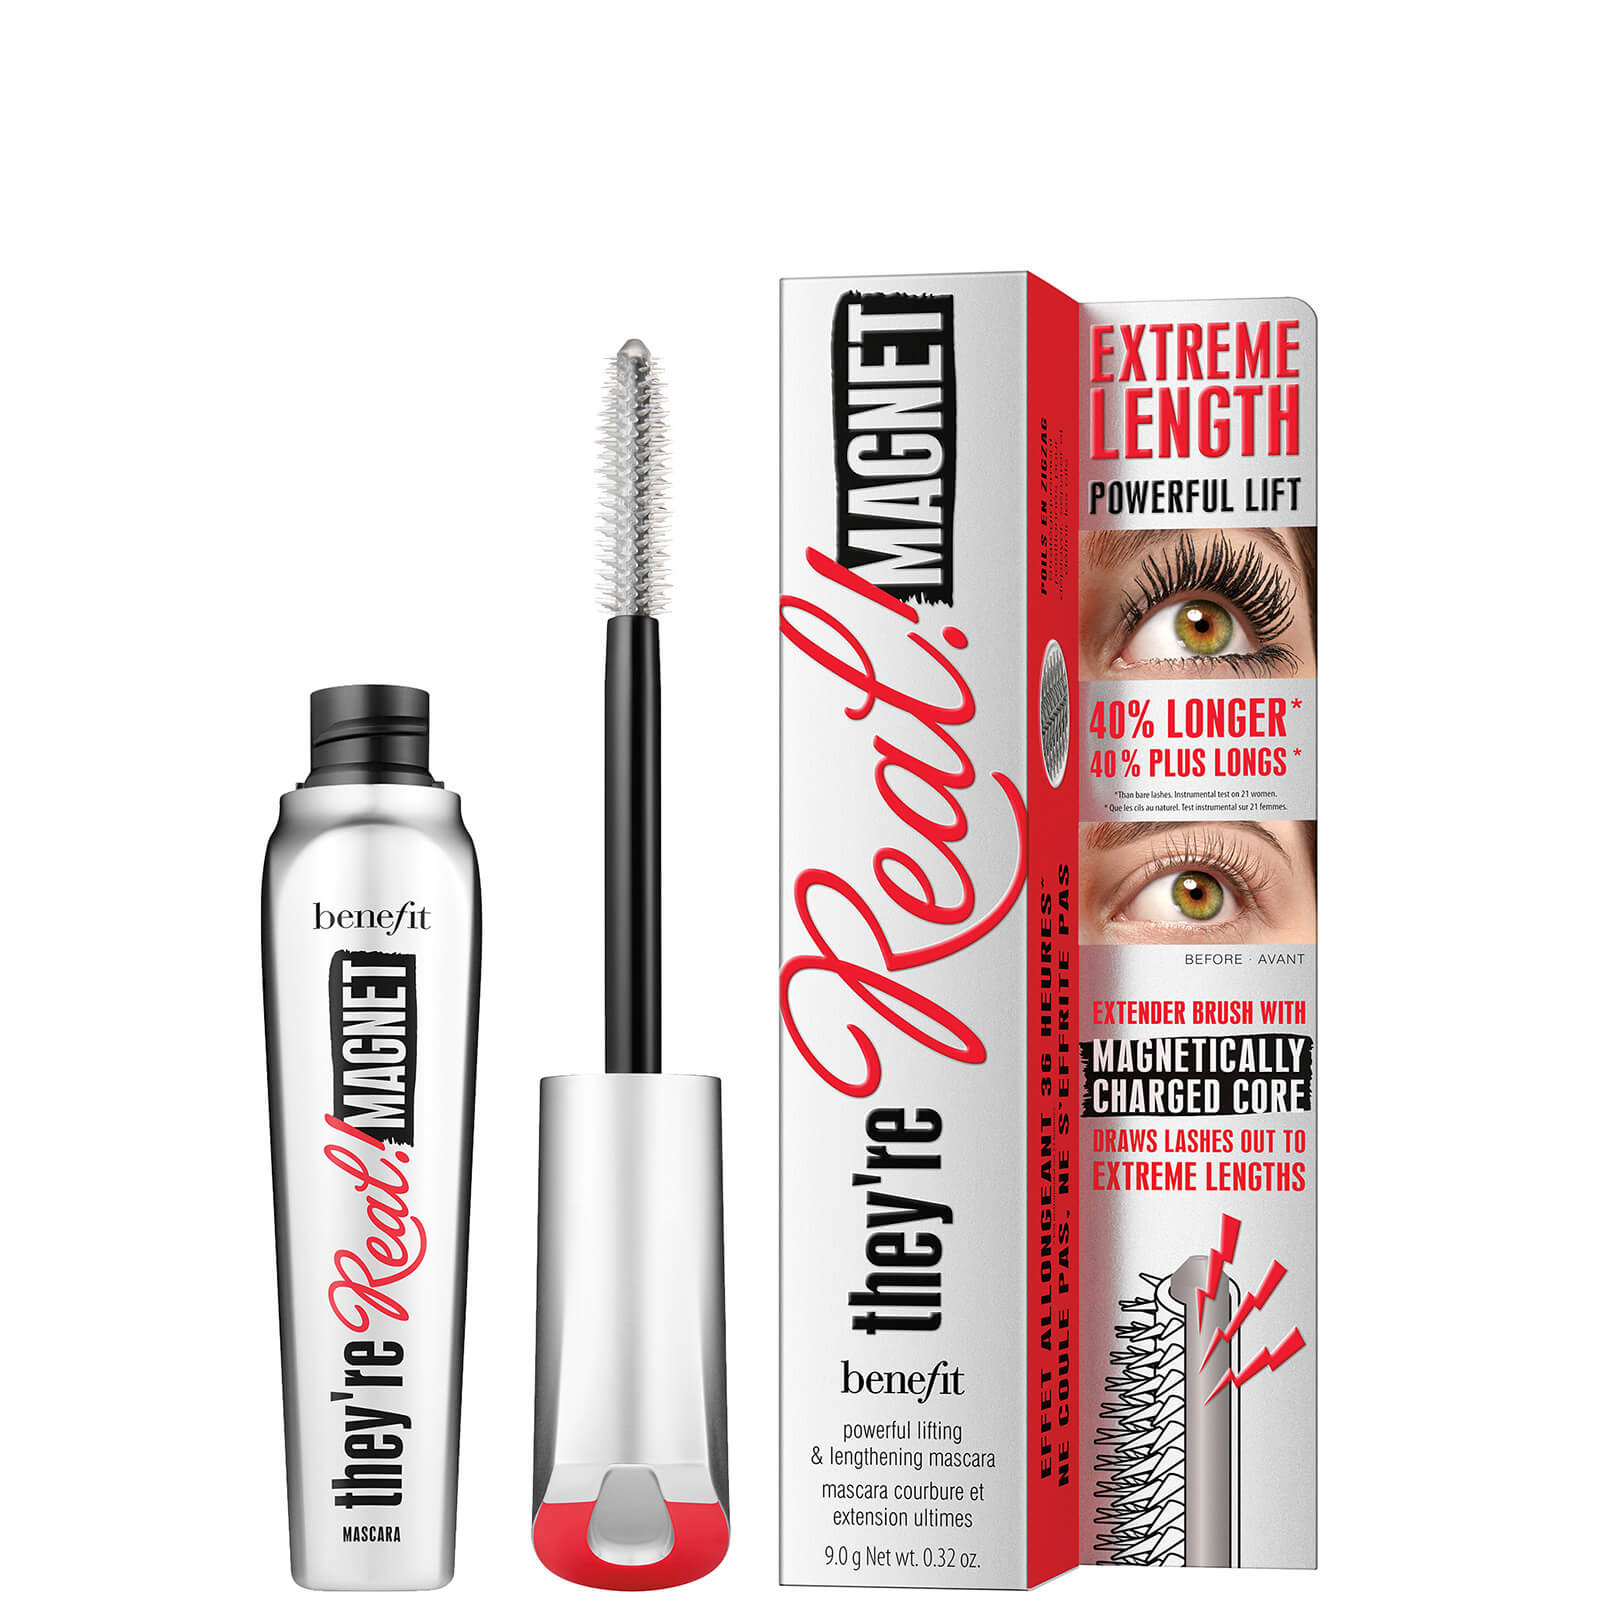 Photos - Mascara Benefit They’re Real Magnet Extreme Lengthening and Powerful Lifting Masca 